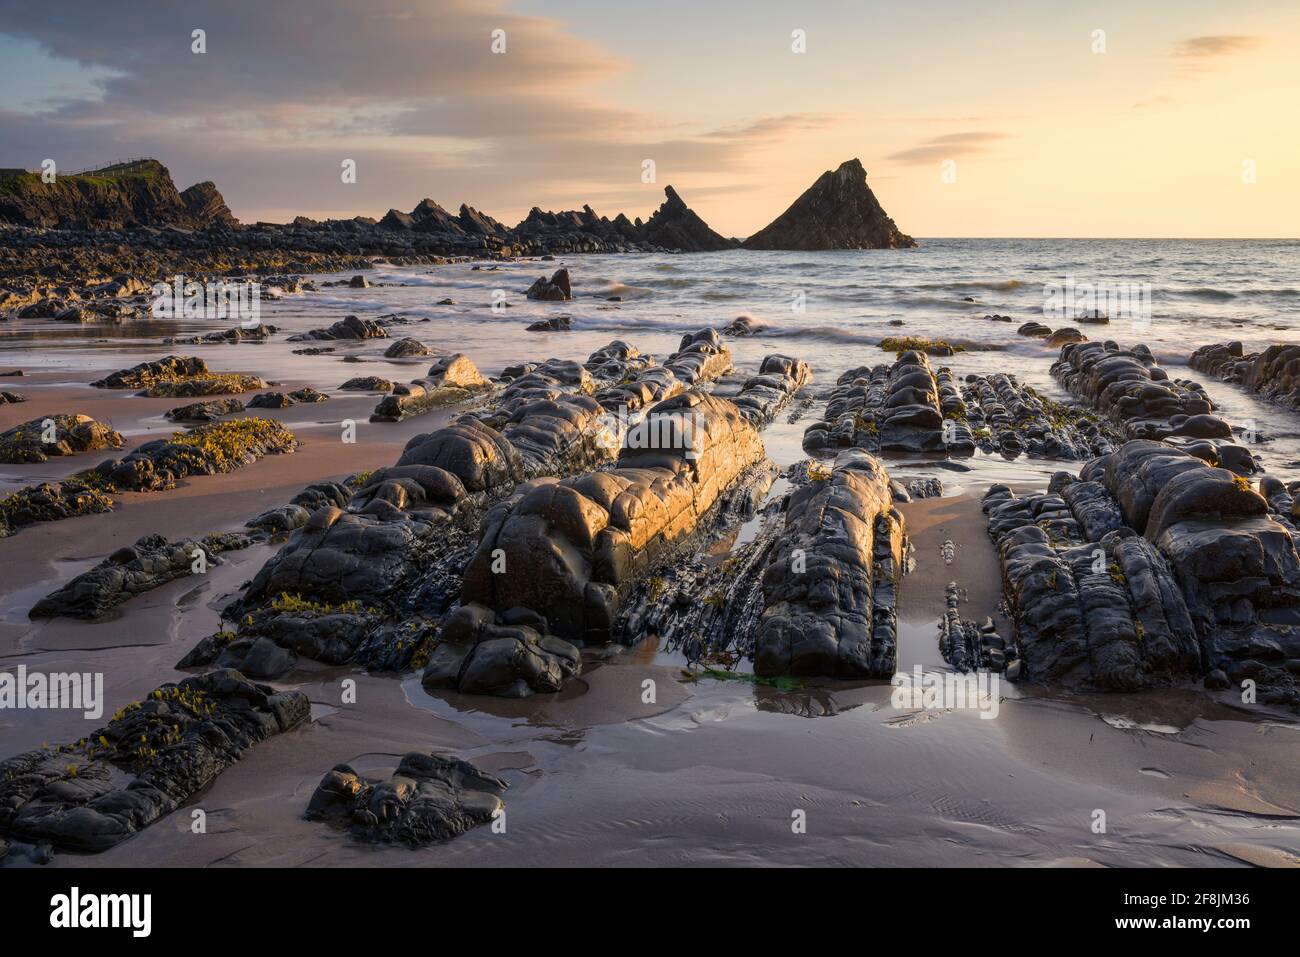 The exposed beach during low tide at Hartland Quay in the North Devon Coast National Landscape at sunset, England. Stock Photo